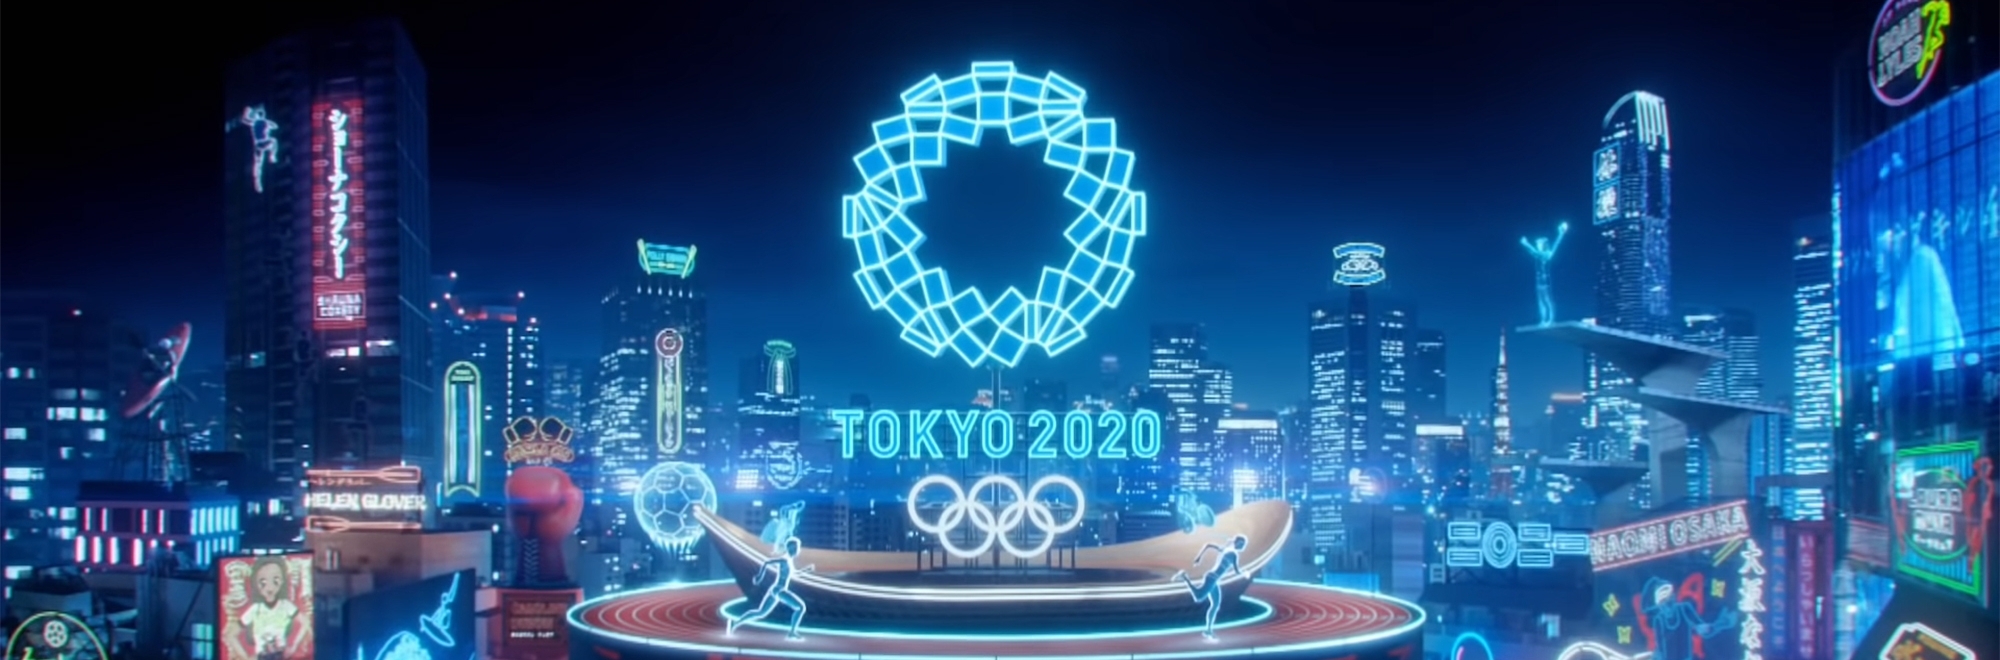 BBC Creative launches Tokyo Olympics 2020 trail: ‘Let’s Go There’